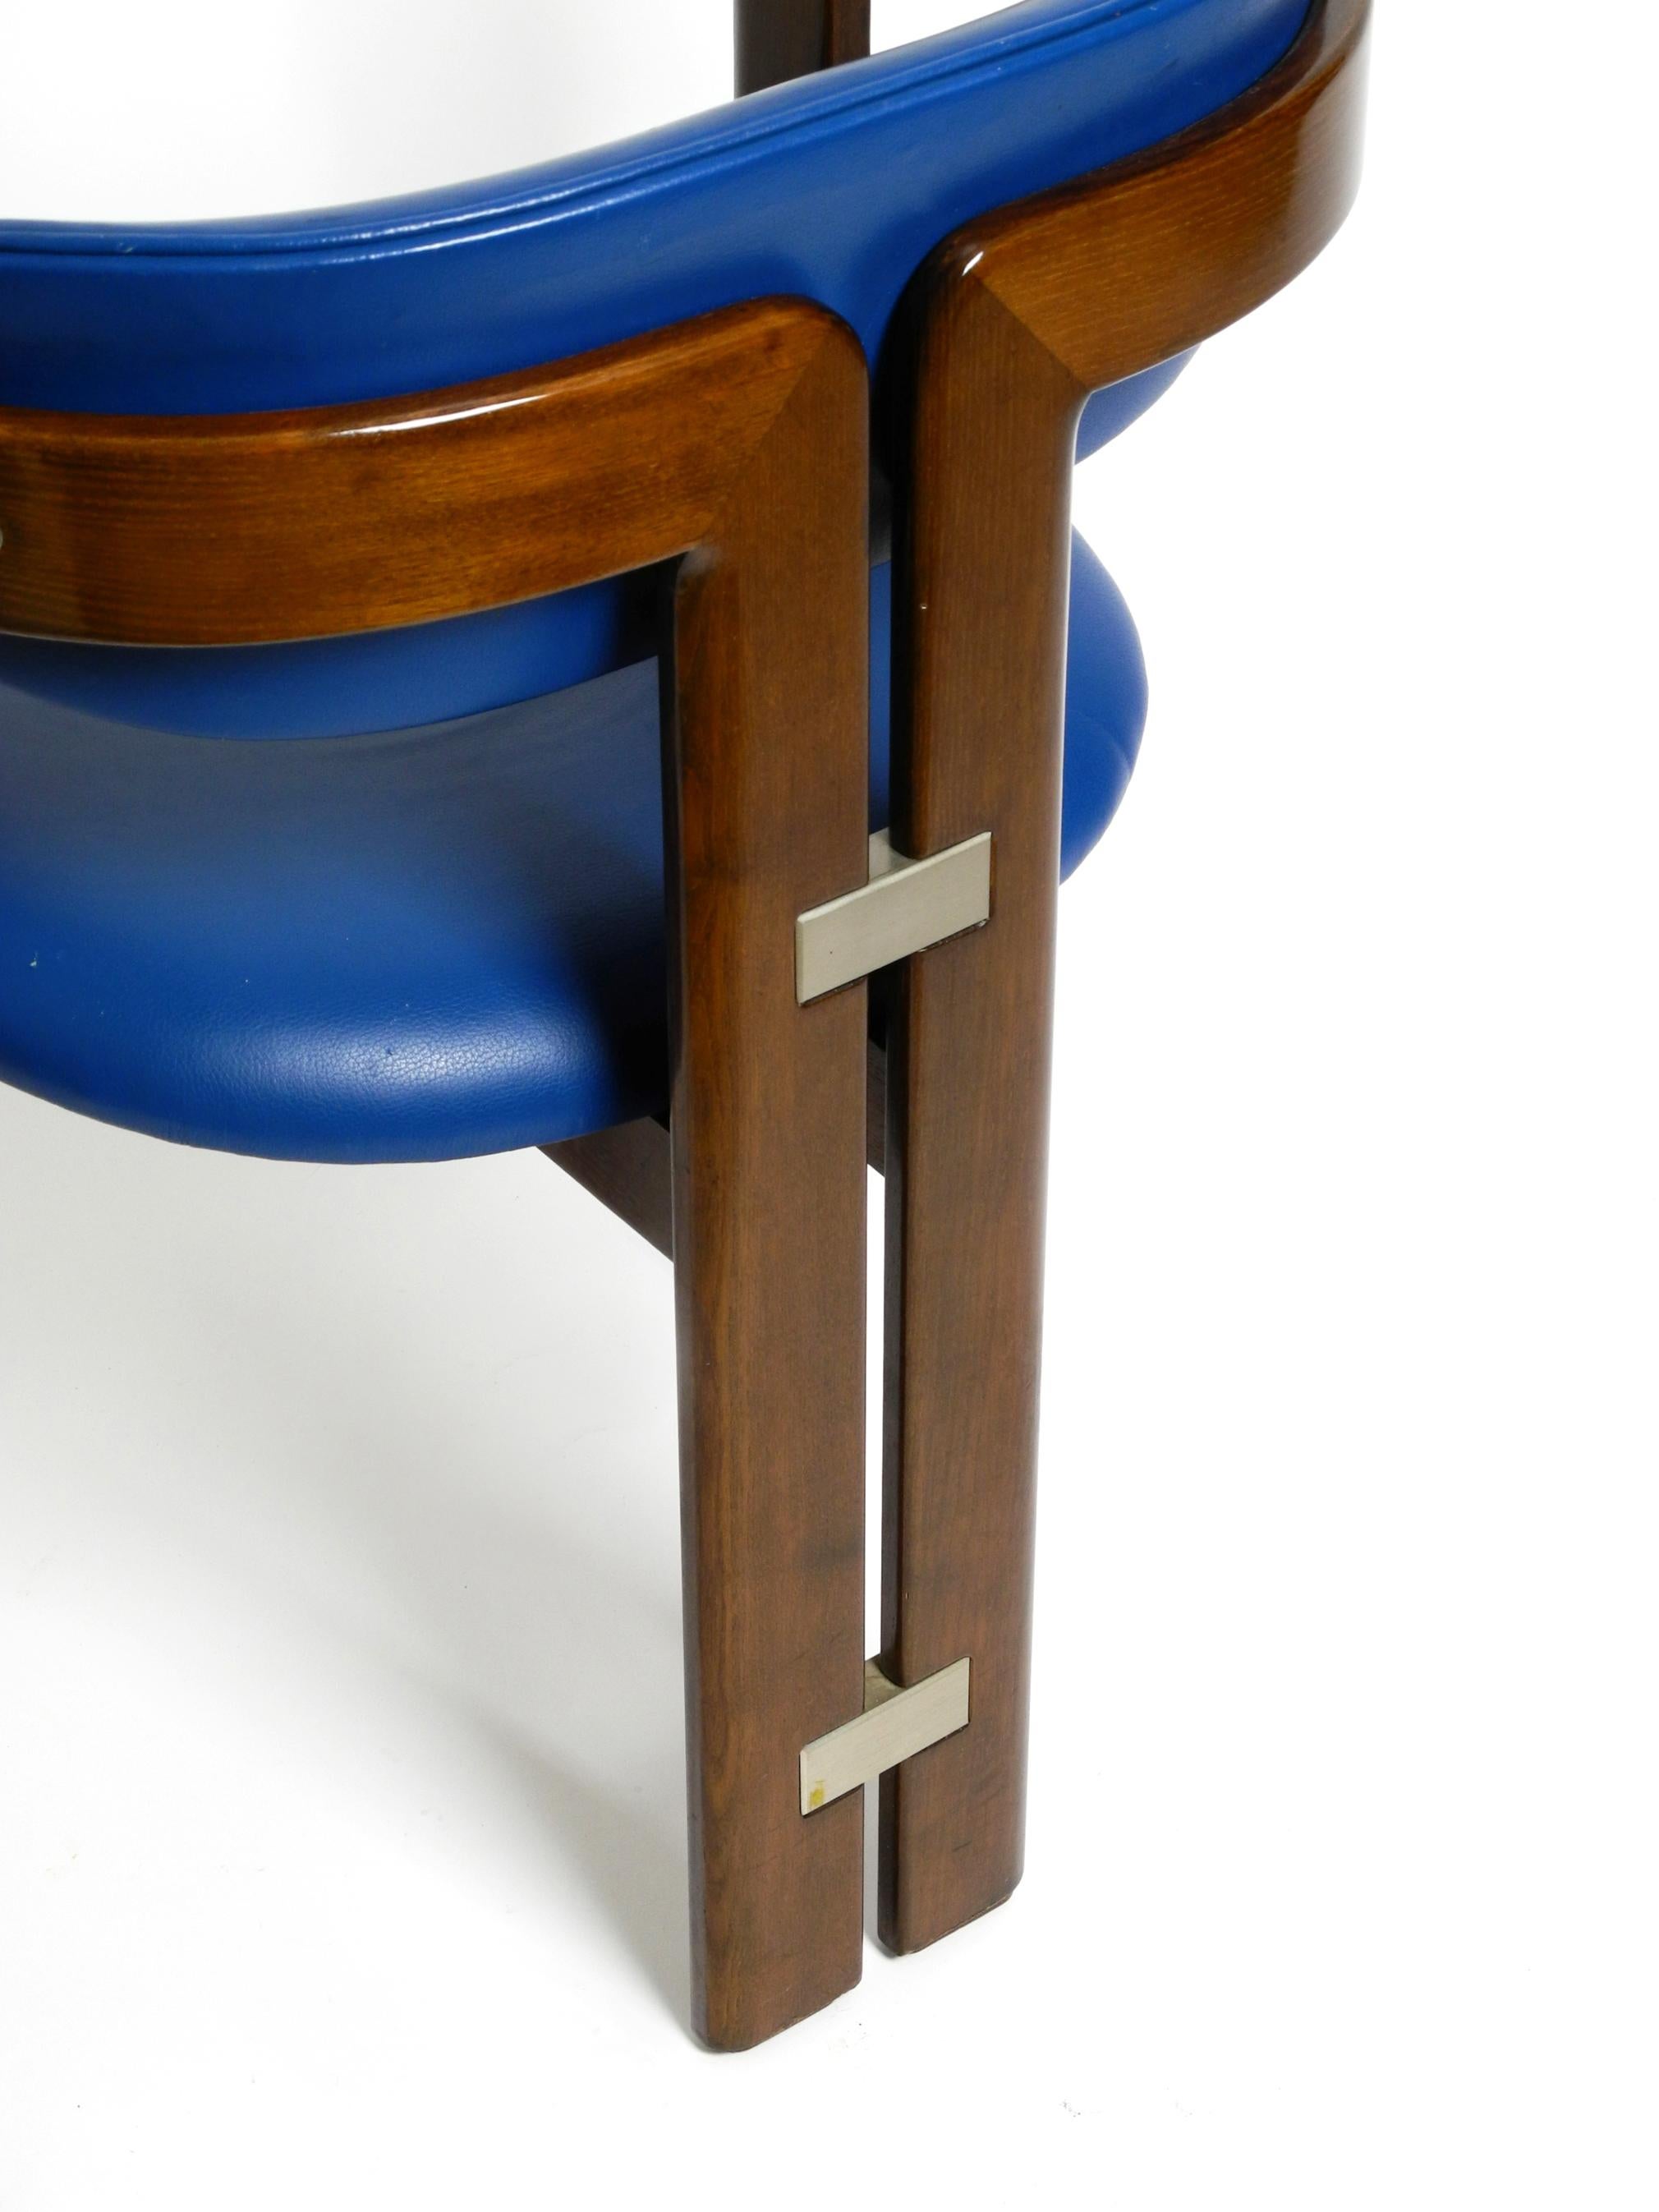 Pamplona Chair by Augusto Savini for Pozzi in Blue Leather Upholstery 9